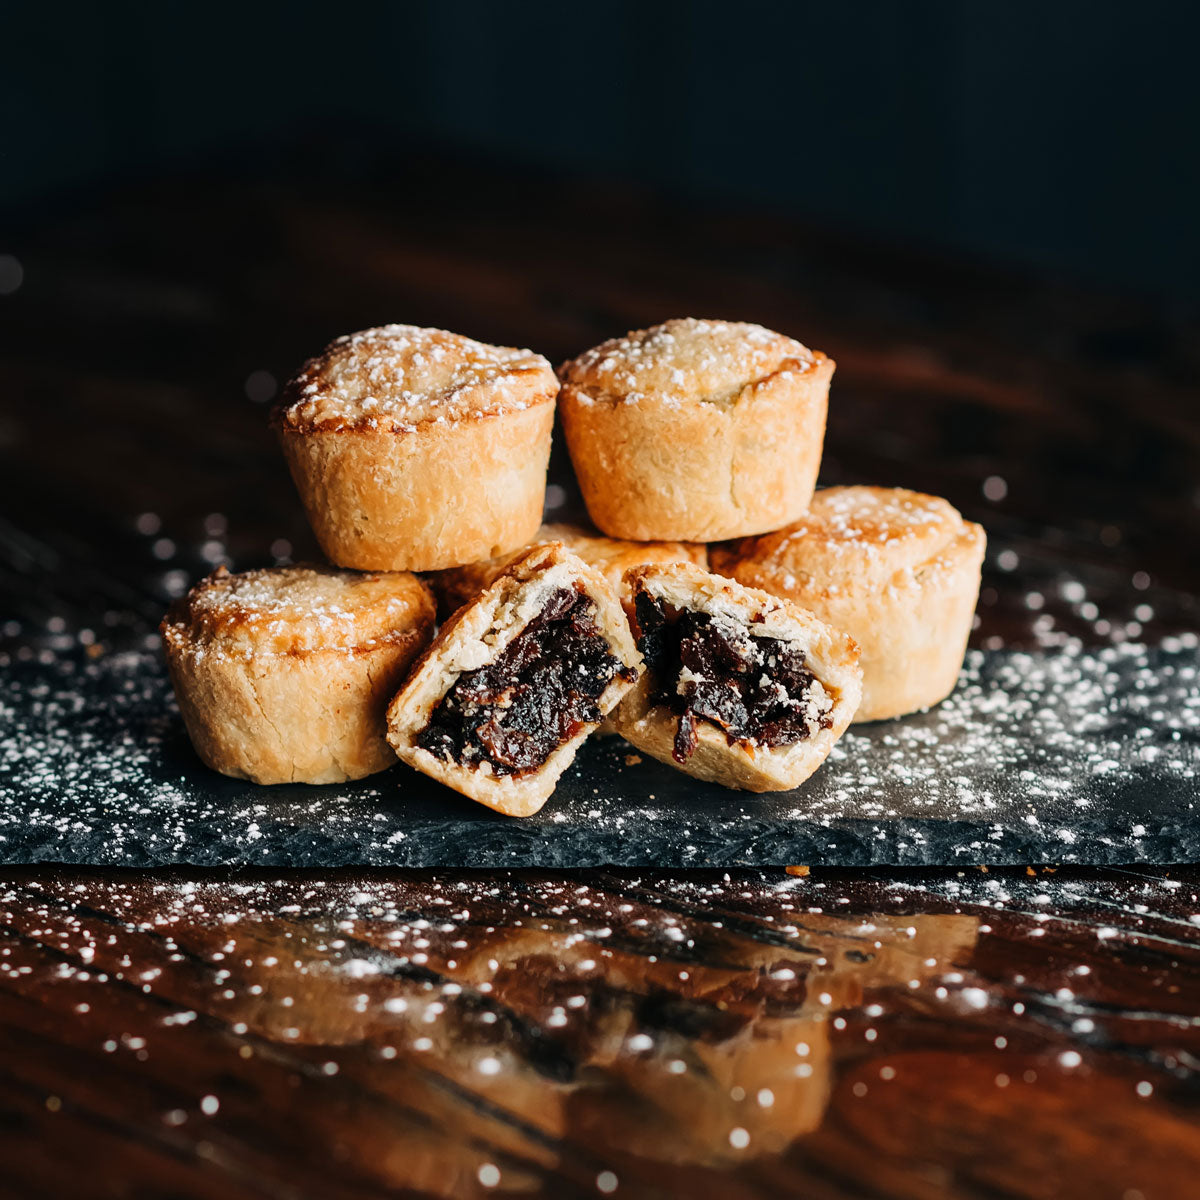 Gourmet mince pies sprinkled with powdered sugar. One pie is broken open to reveal the mince filling.